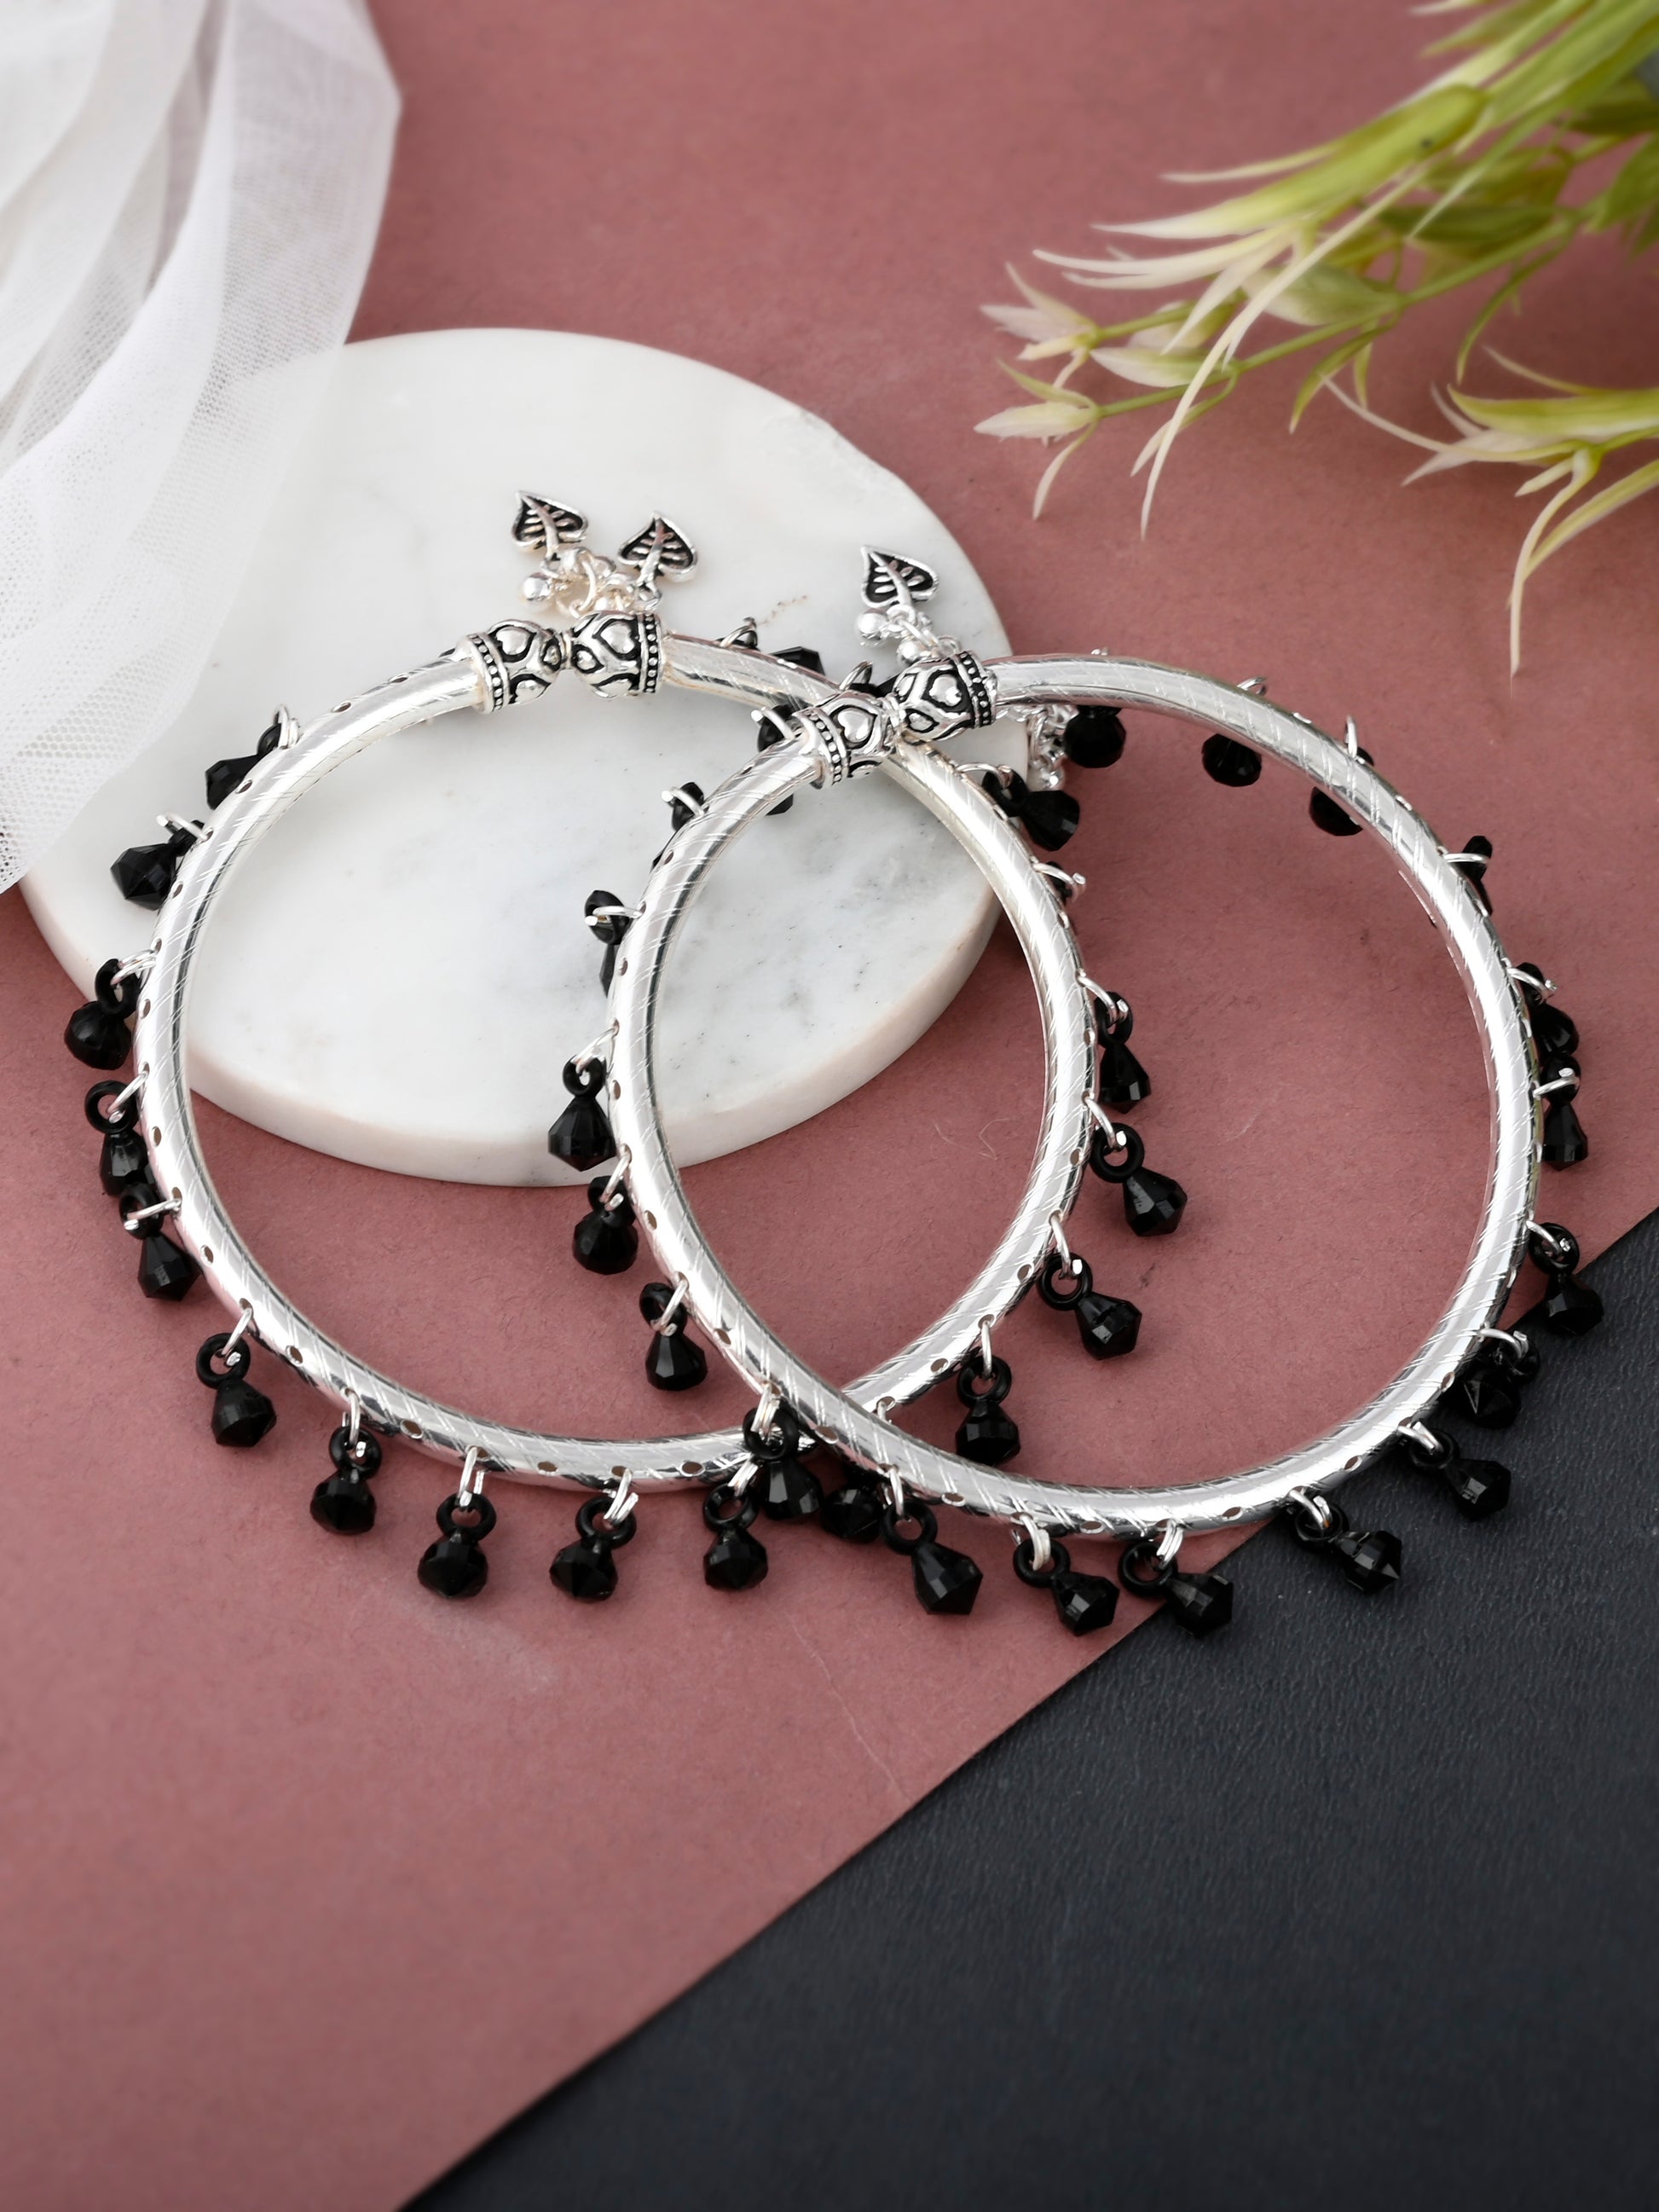 Butterfly Charm Anklets with Black Bead Accents